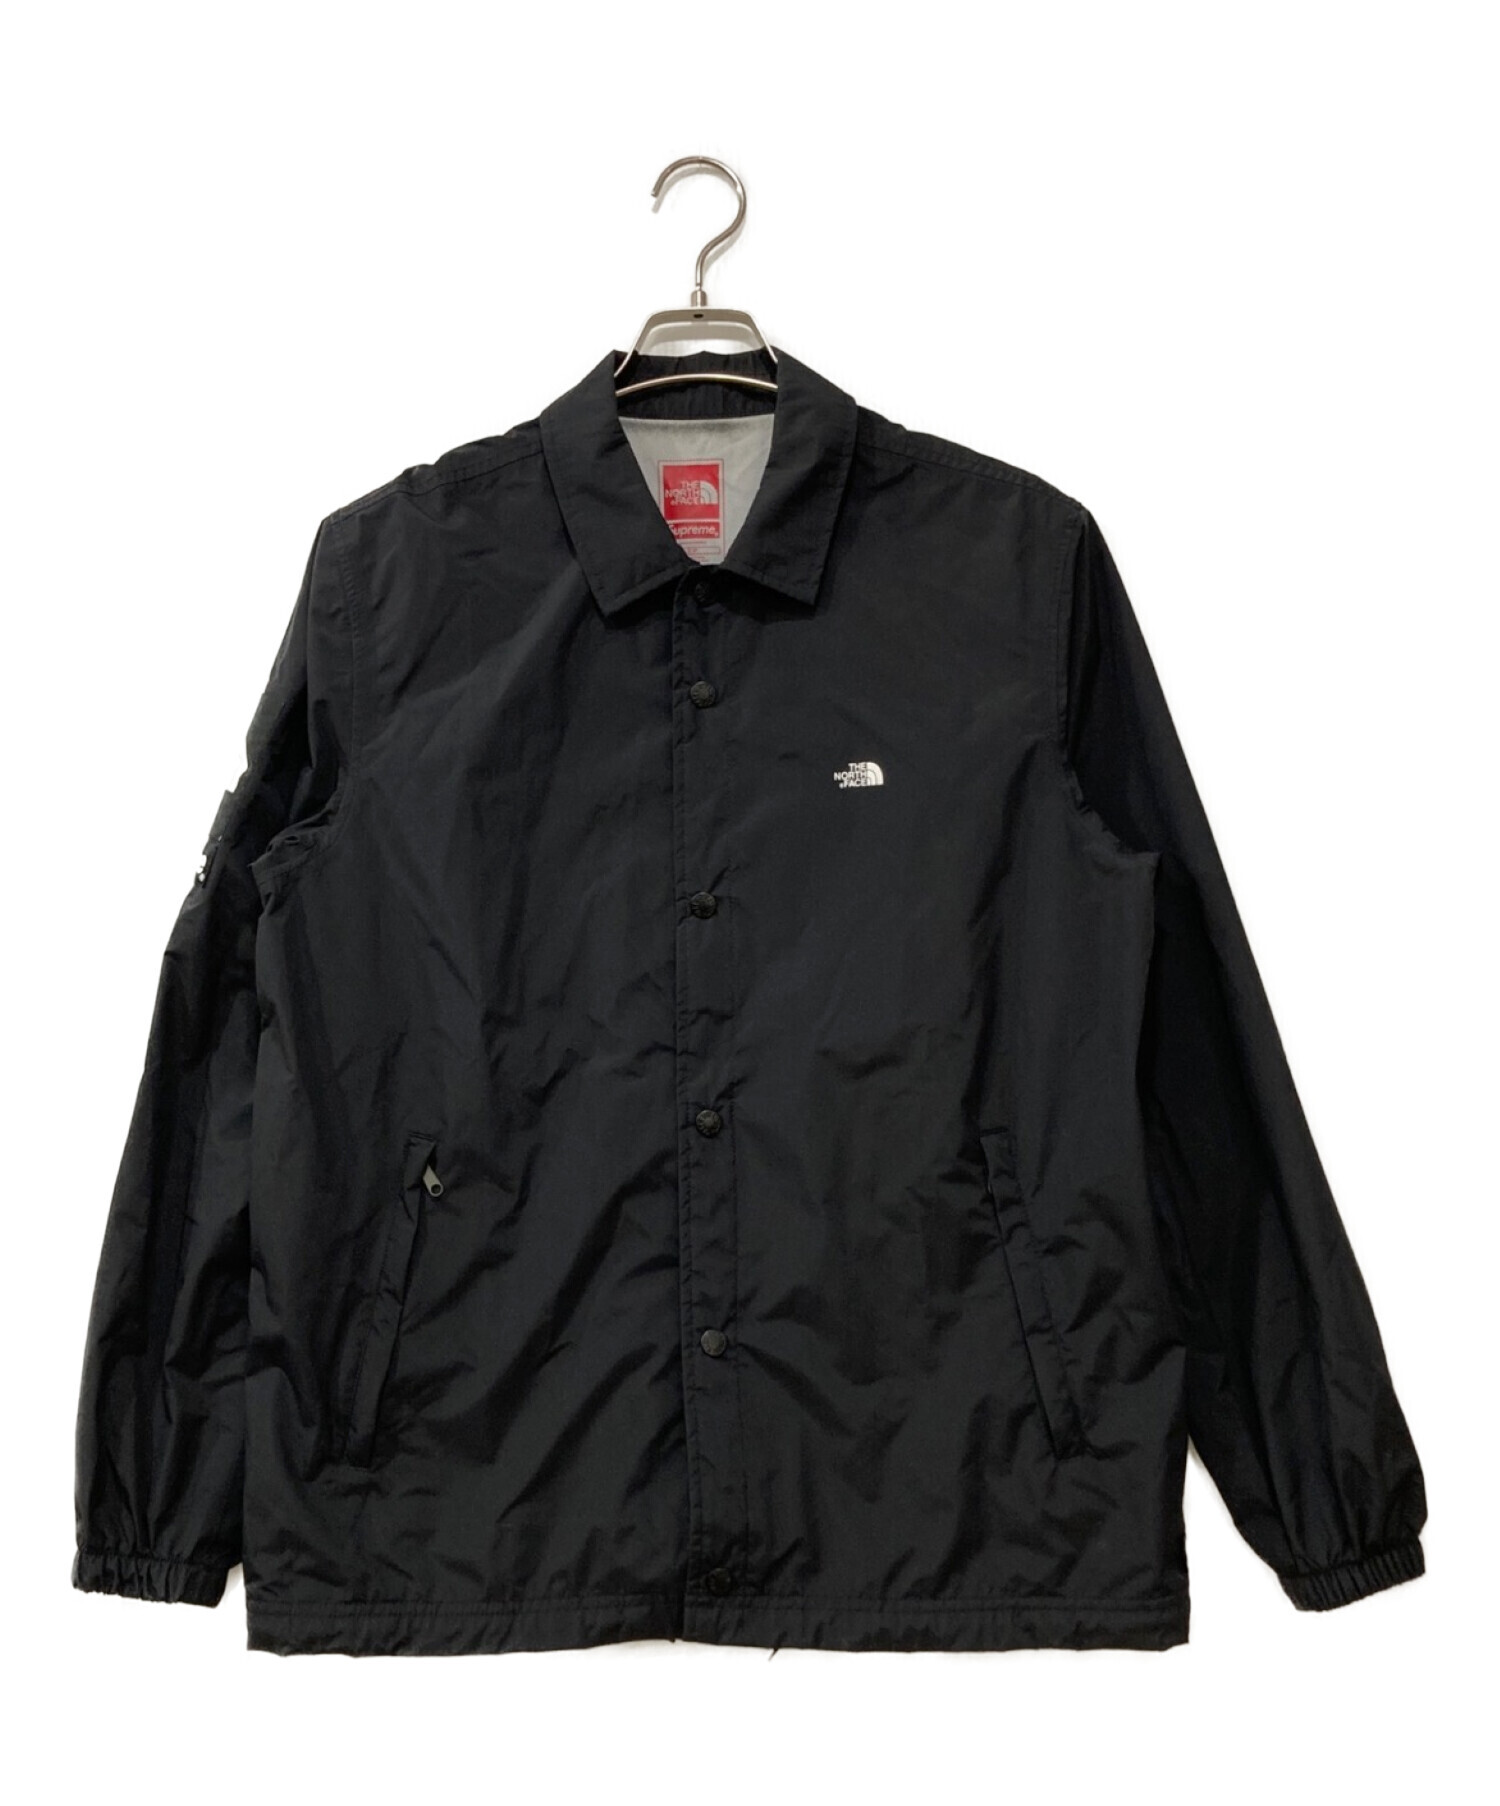 SUPREME×THE NORTH FACE (シュプリーム × ザノースフェイス) 15SS Packable Coaches Jacket  ブラック サイズ:S